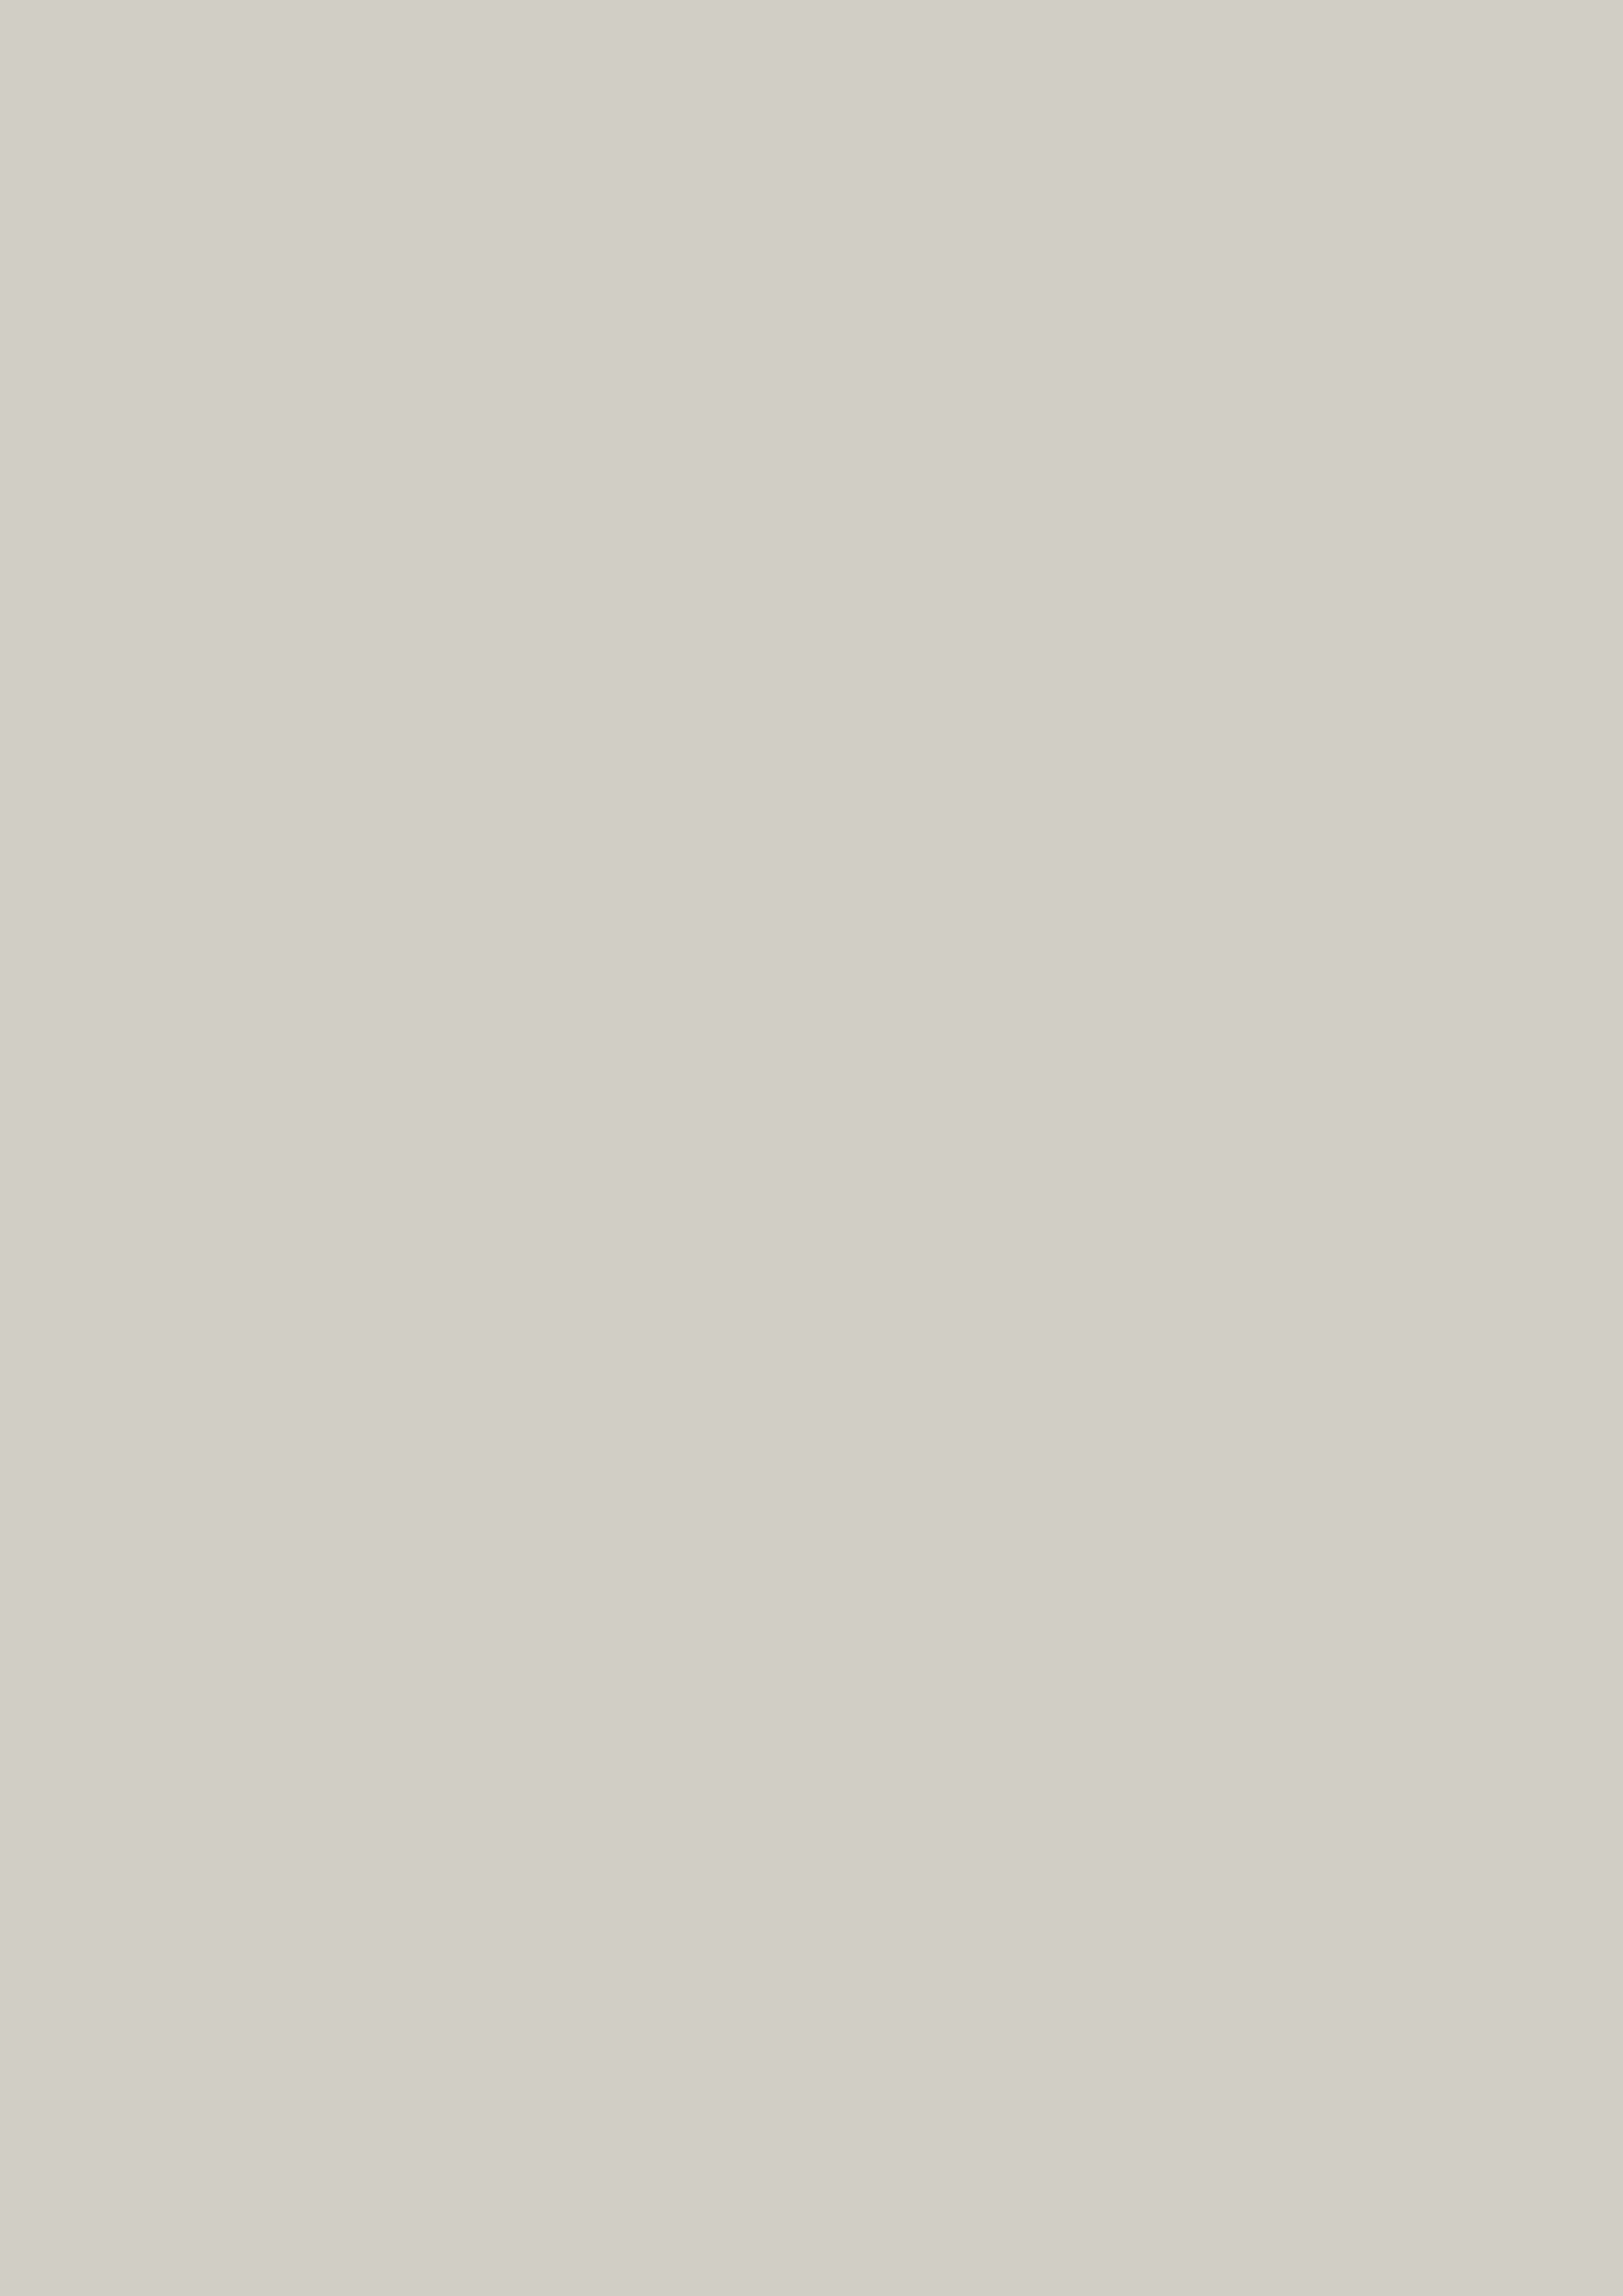 2480x3508 Pastel Gray Solid Color Background